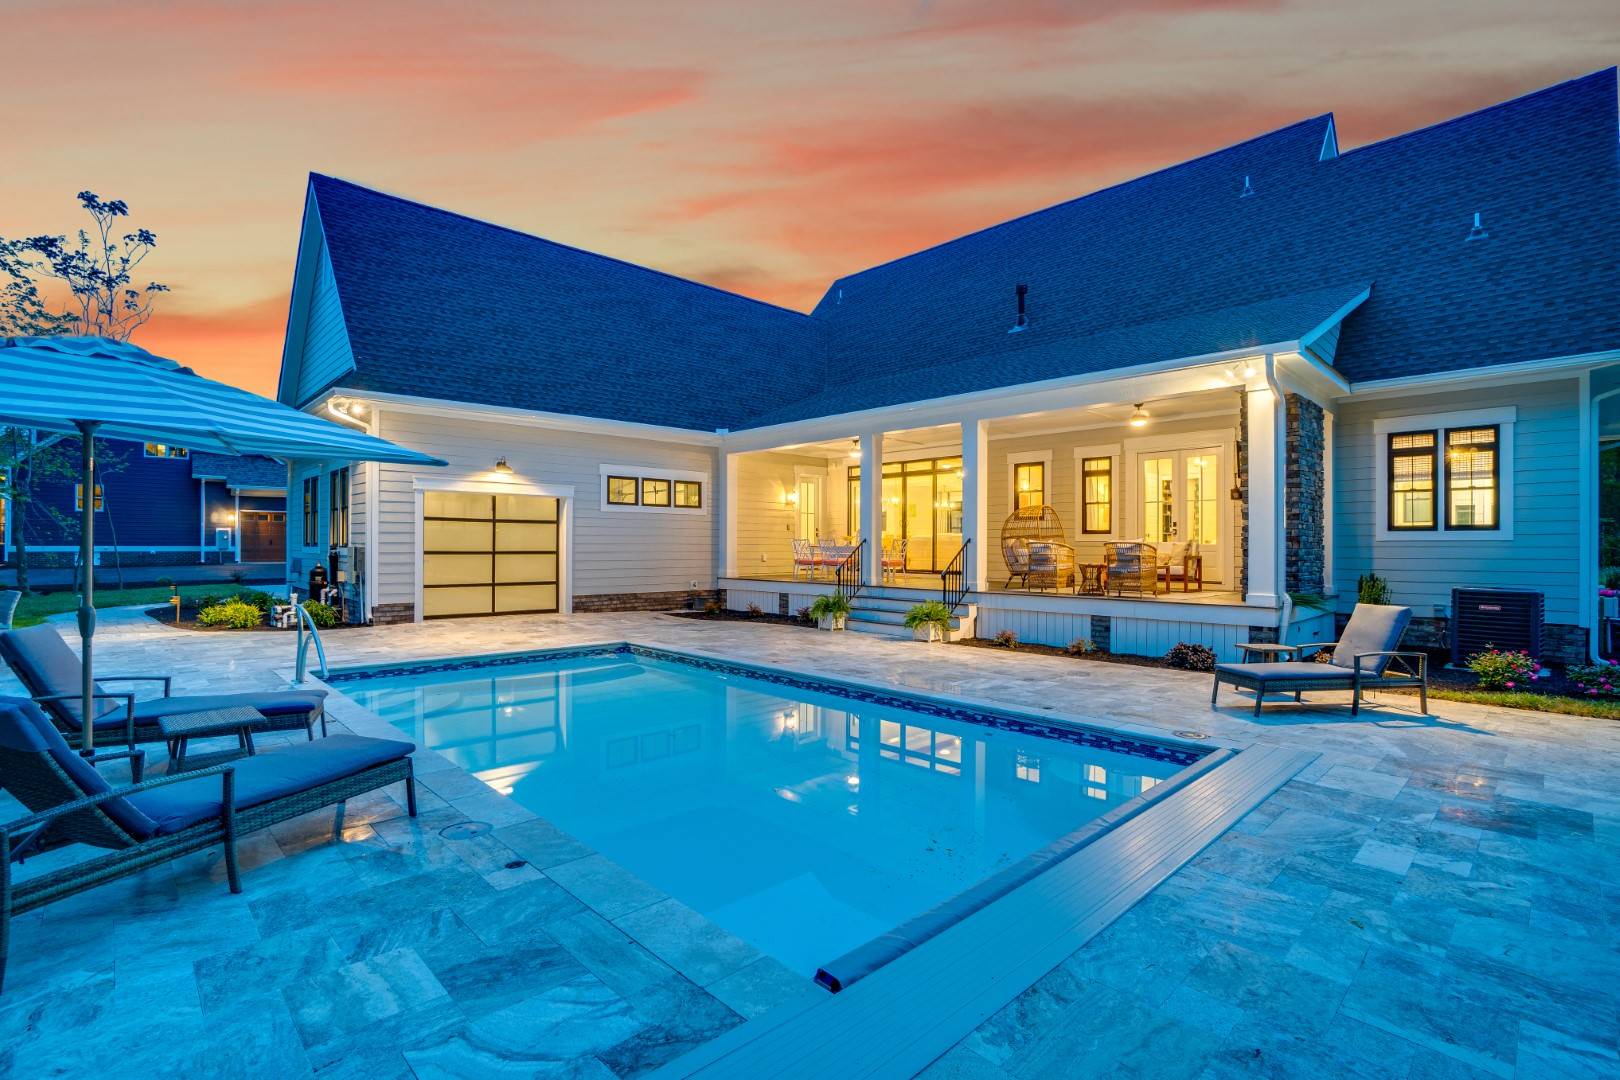 Perfect Evening Rear View featuring Rear Porch and Pool